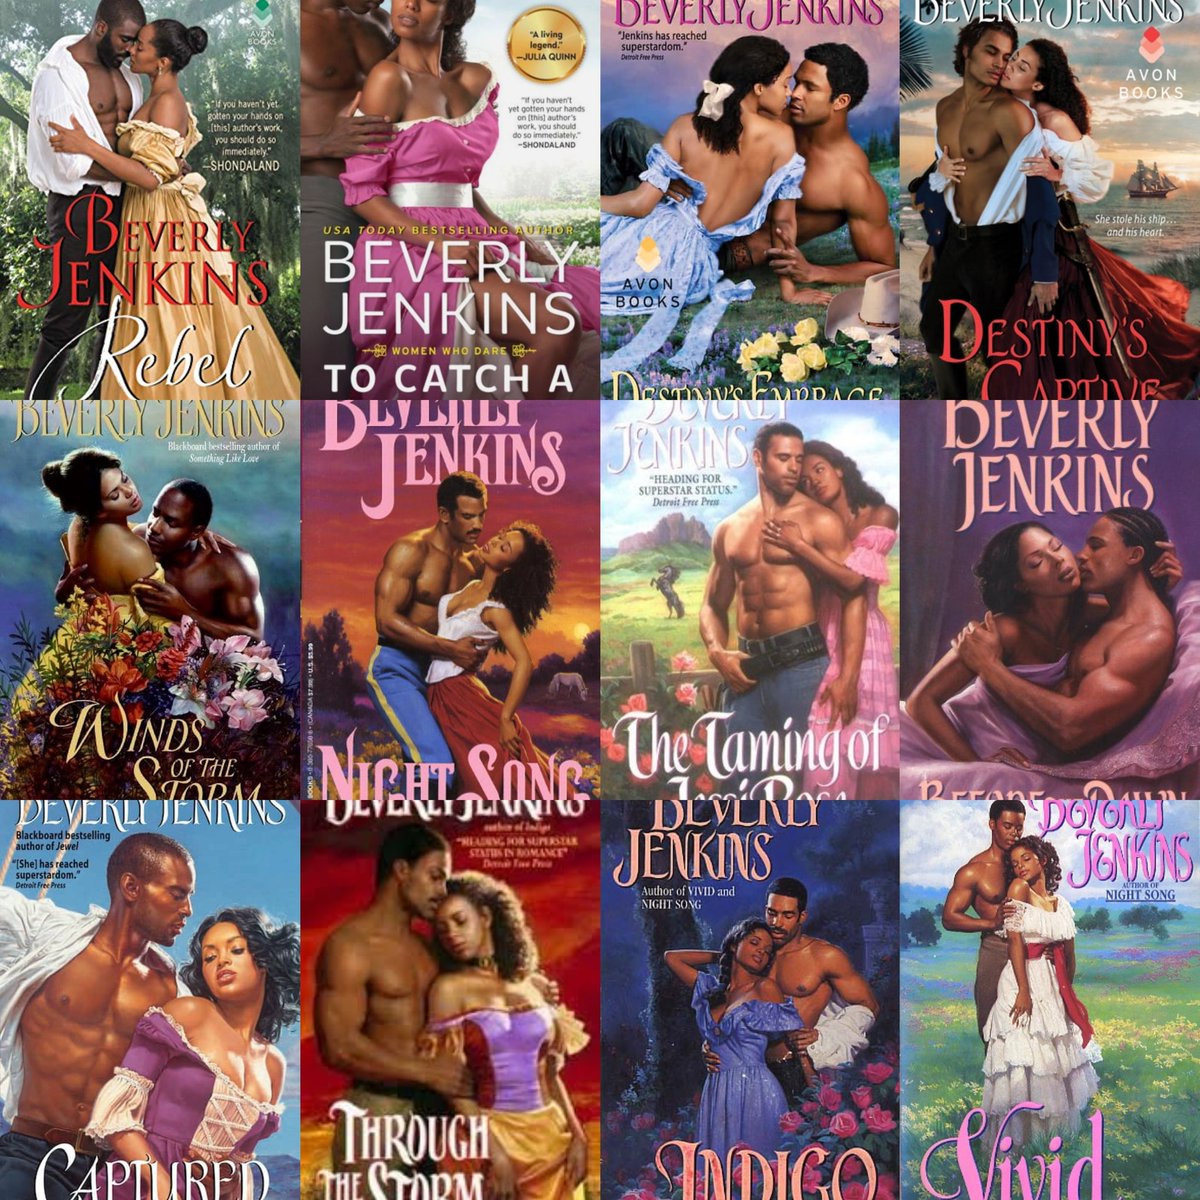 can I just take a moment to appreciate @authorMsBev 's book covers? they're all STUNNING. this isn't even all of them, just my very favorites that always catch my eye